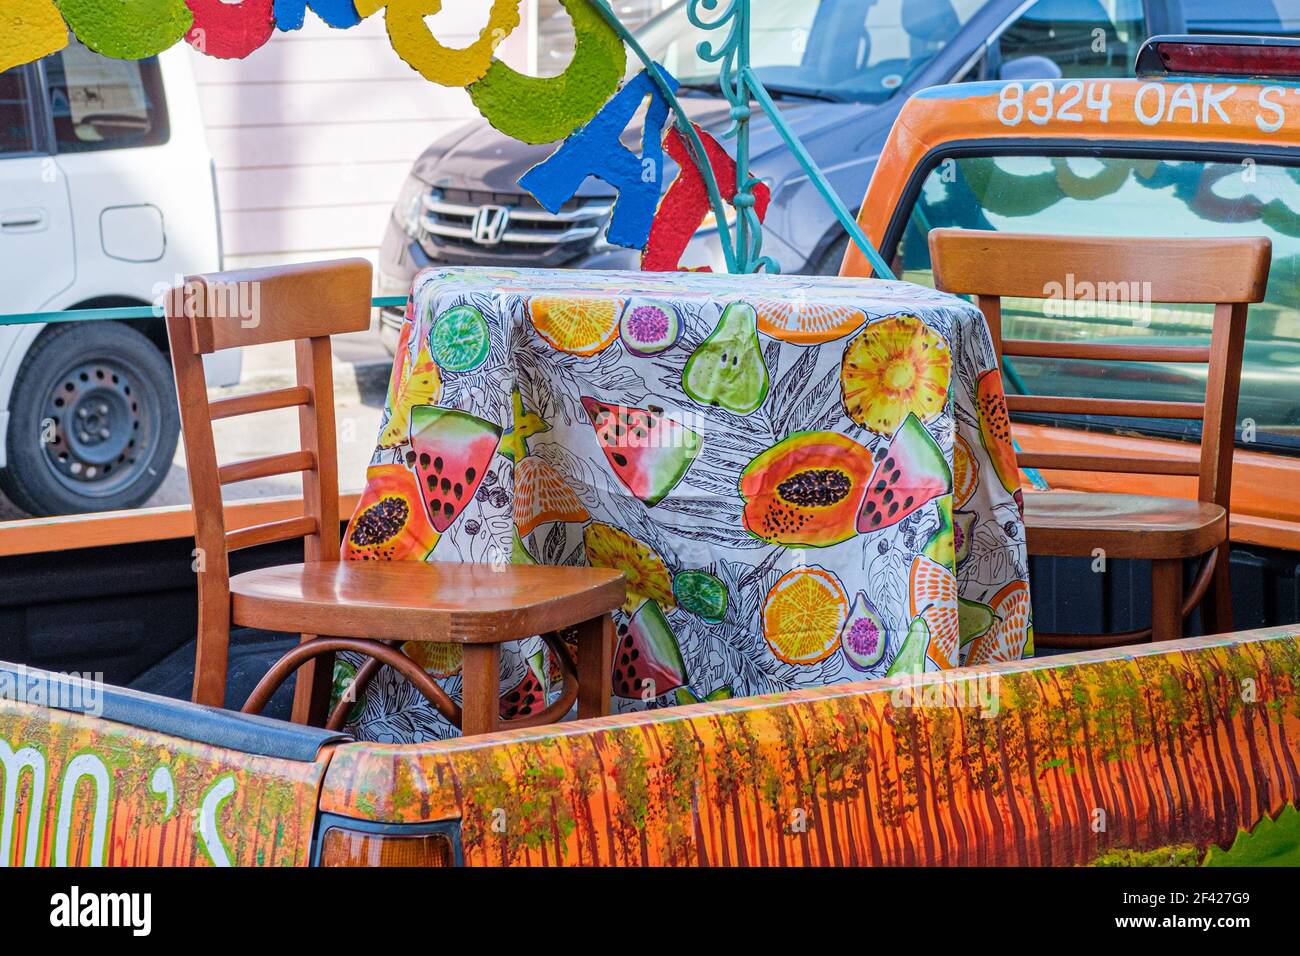 NEW ORLEANS, LA, USA - MARCH 13, 2021: Table and chairs in back of a pickup truck in front of Jacques-Imo's Restaurant on Oak Street Stock Photo